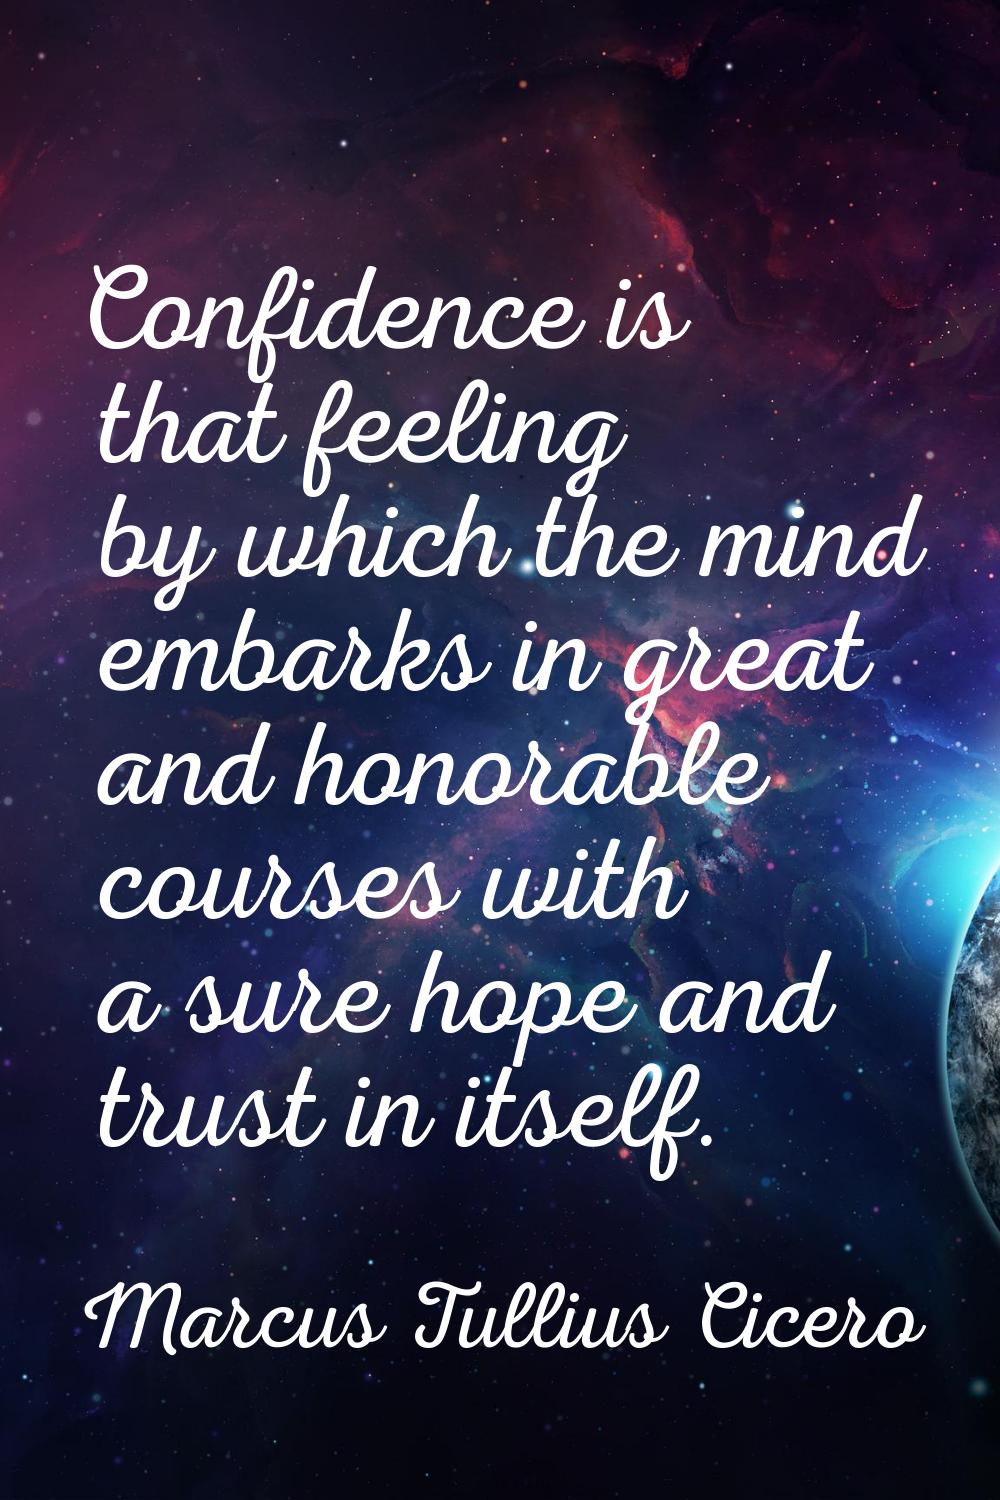 Confidence is that feeling by which the mind embarks in great and honorable courses with a sure hop